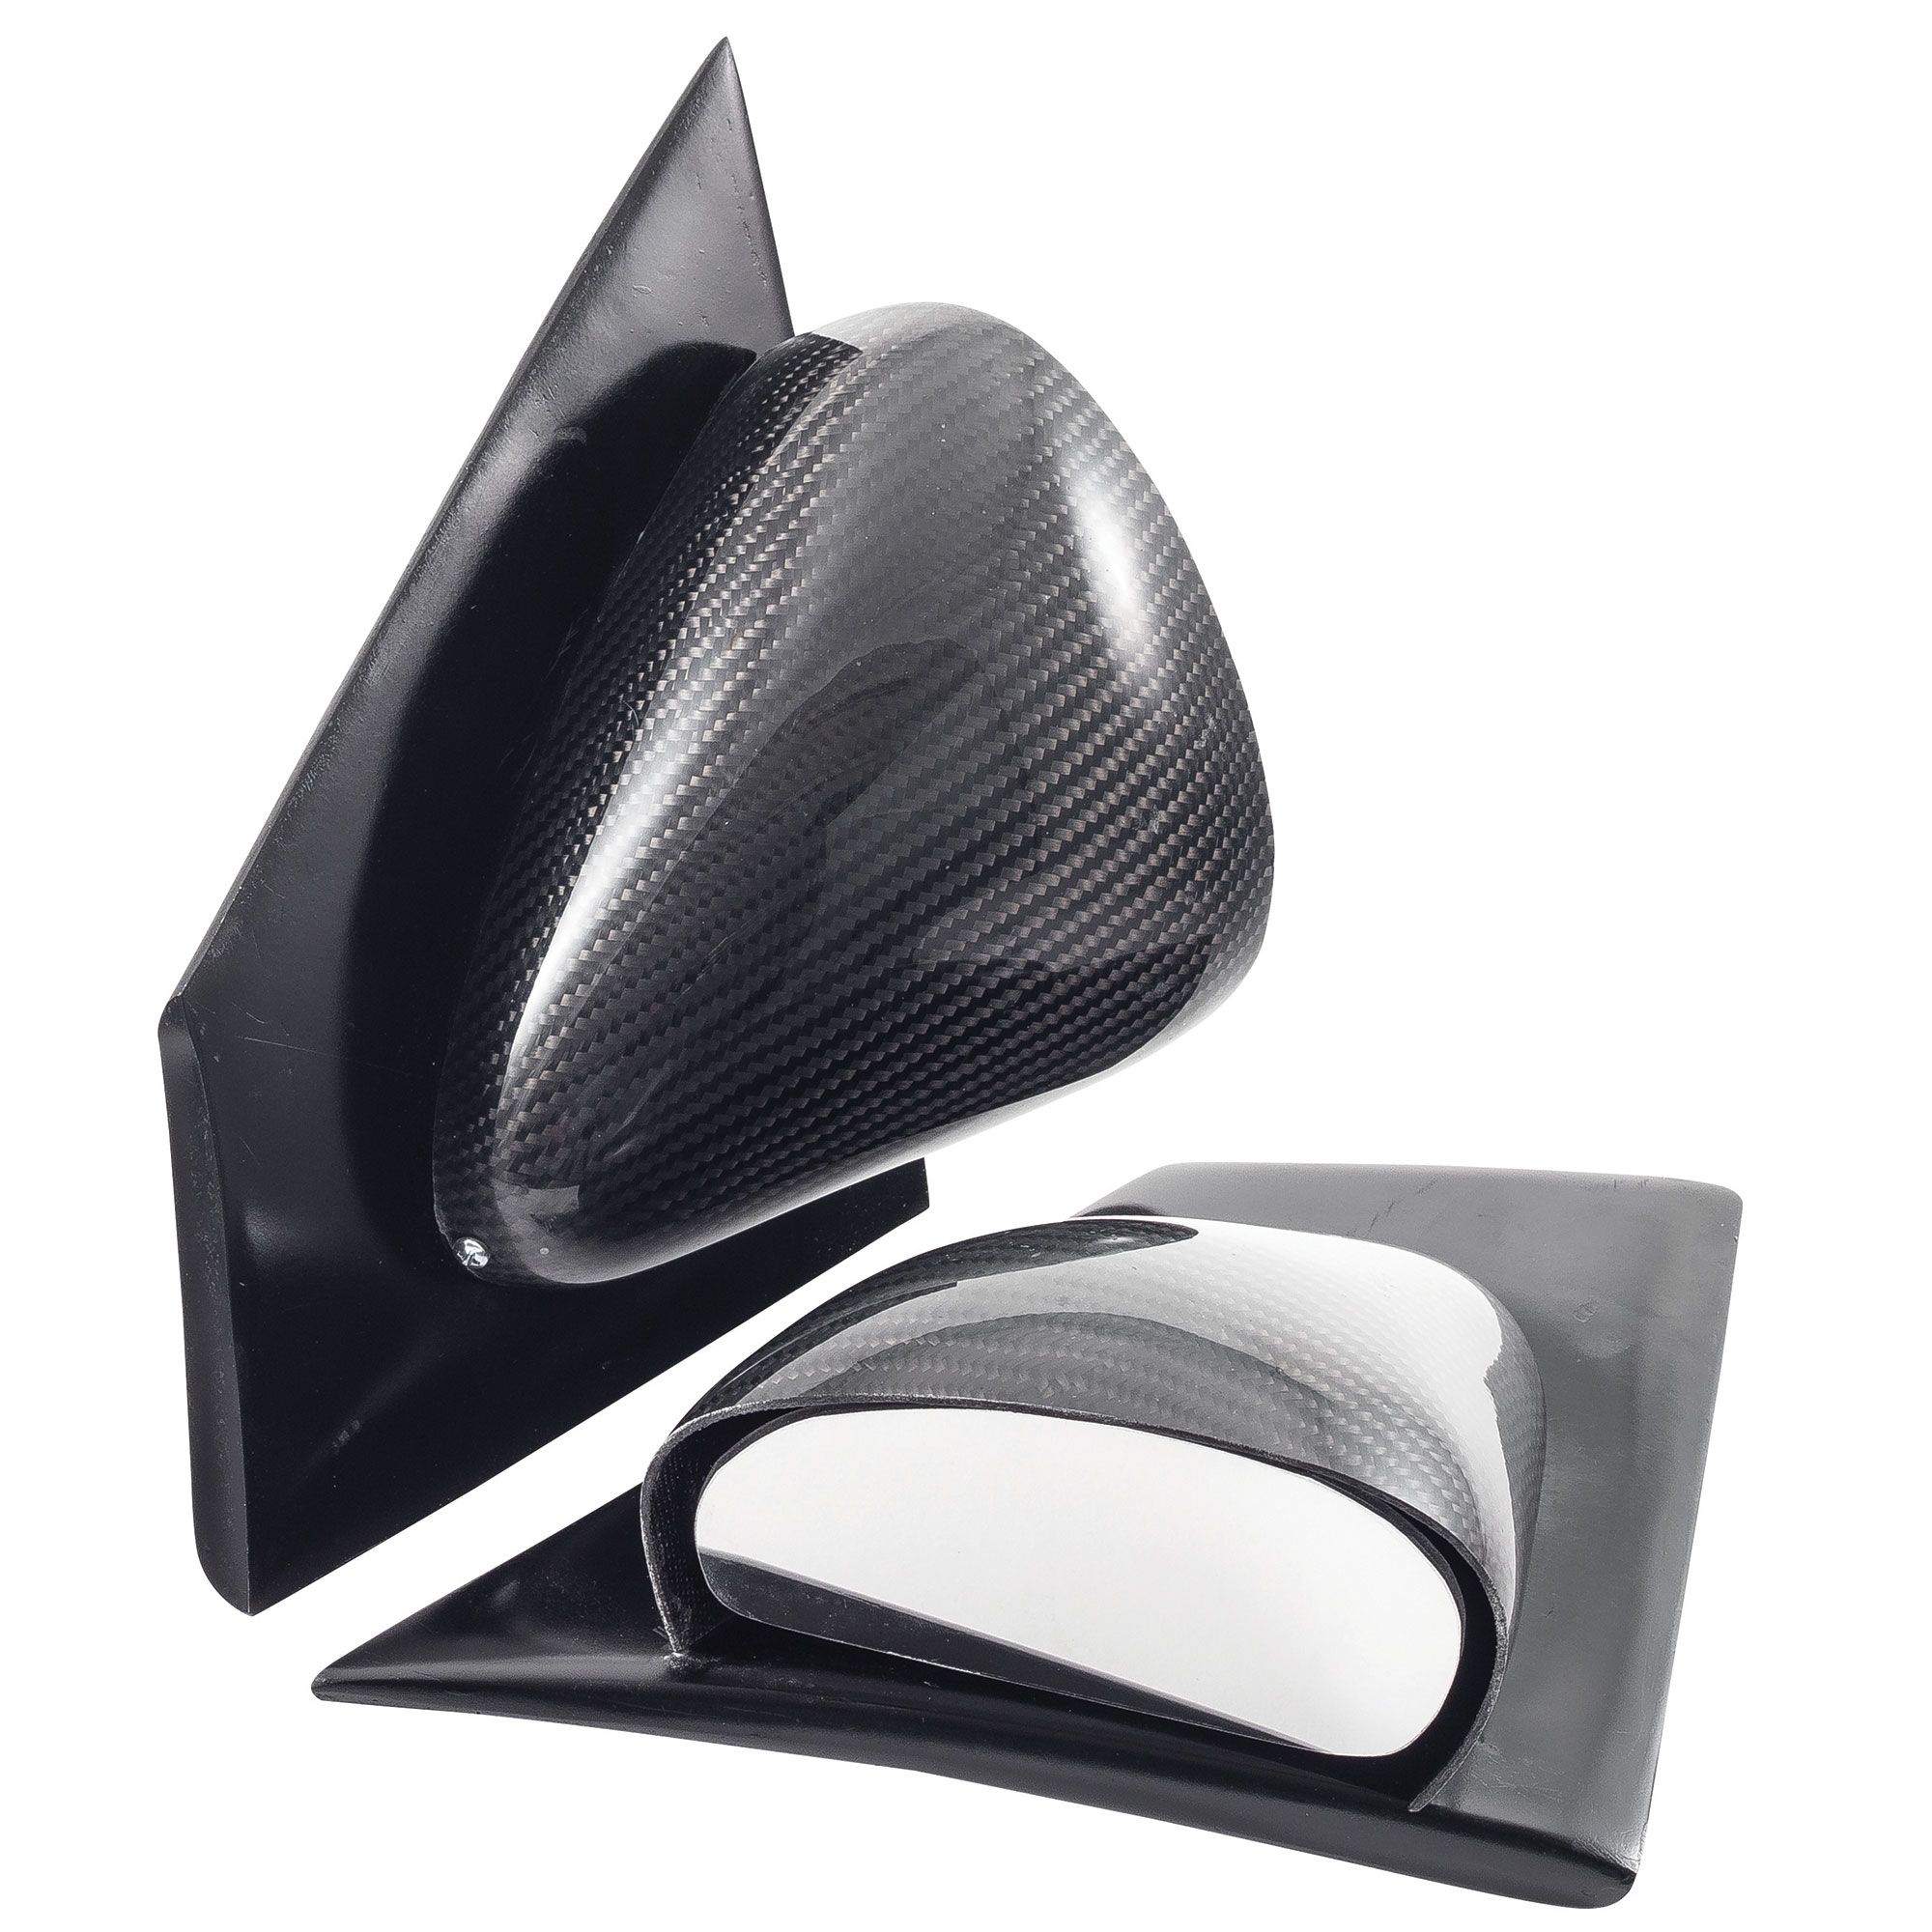 wing mirrors for cycles